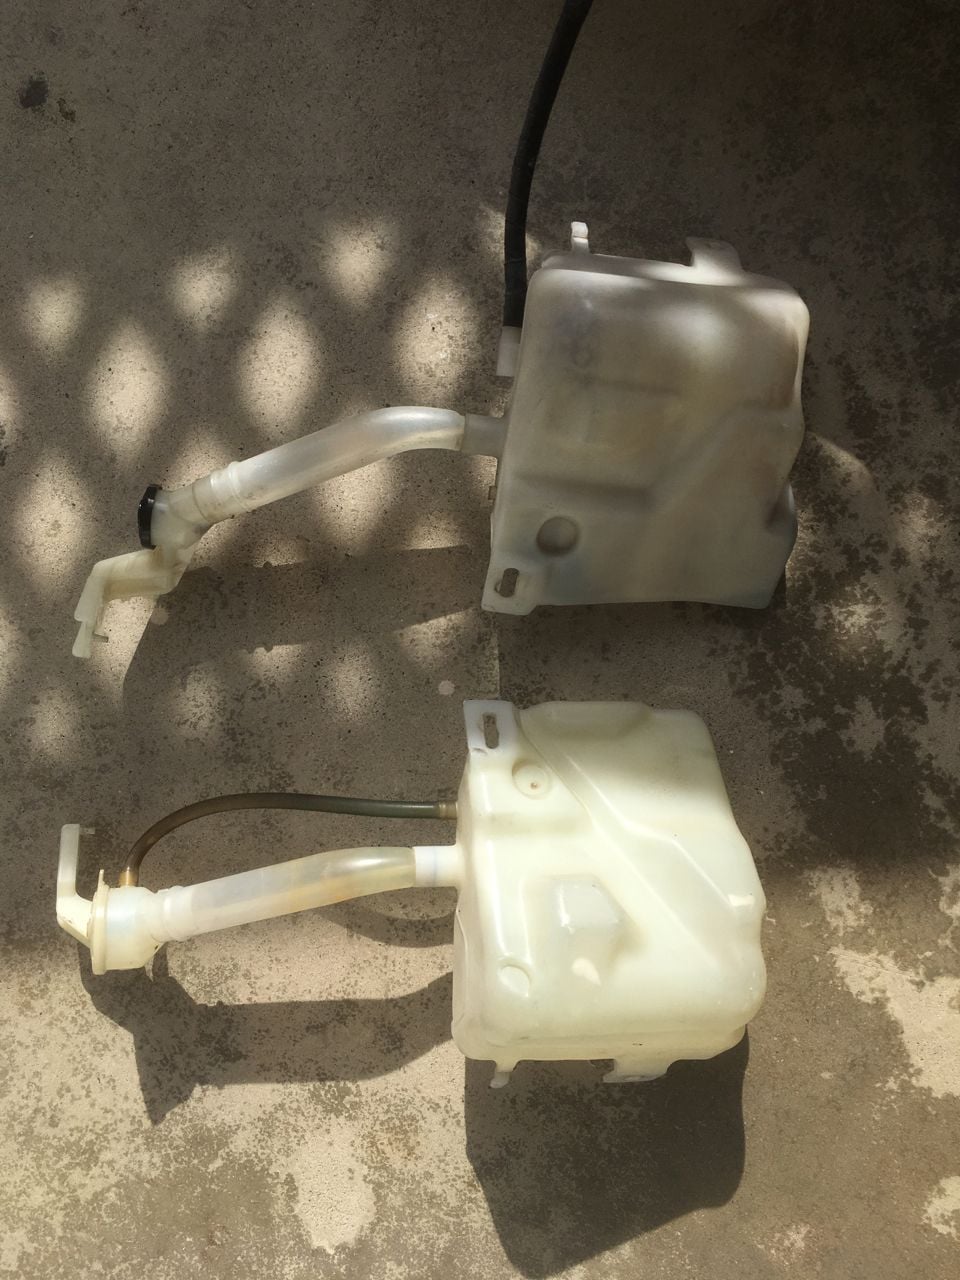 1993 Mazda RX-7 - coolant expansion tank - Engine - Complete - $20 - Seal Beach, CA 90740, United States